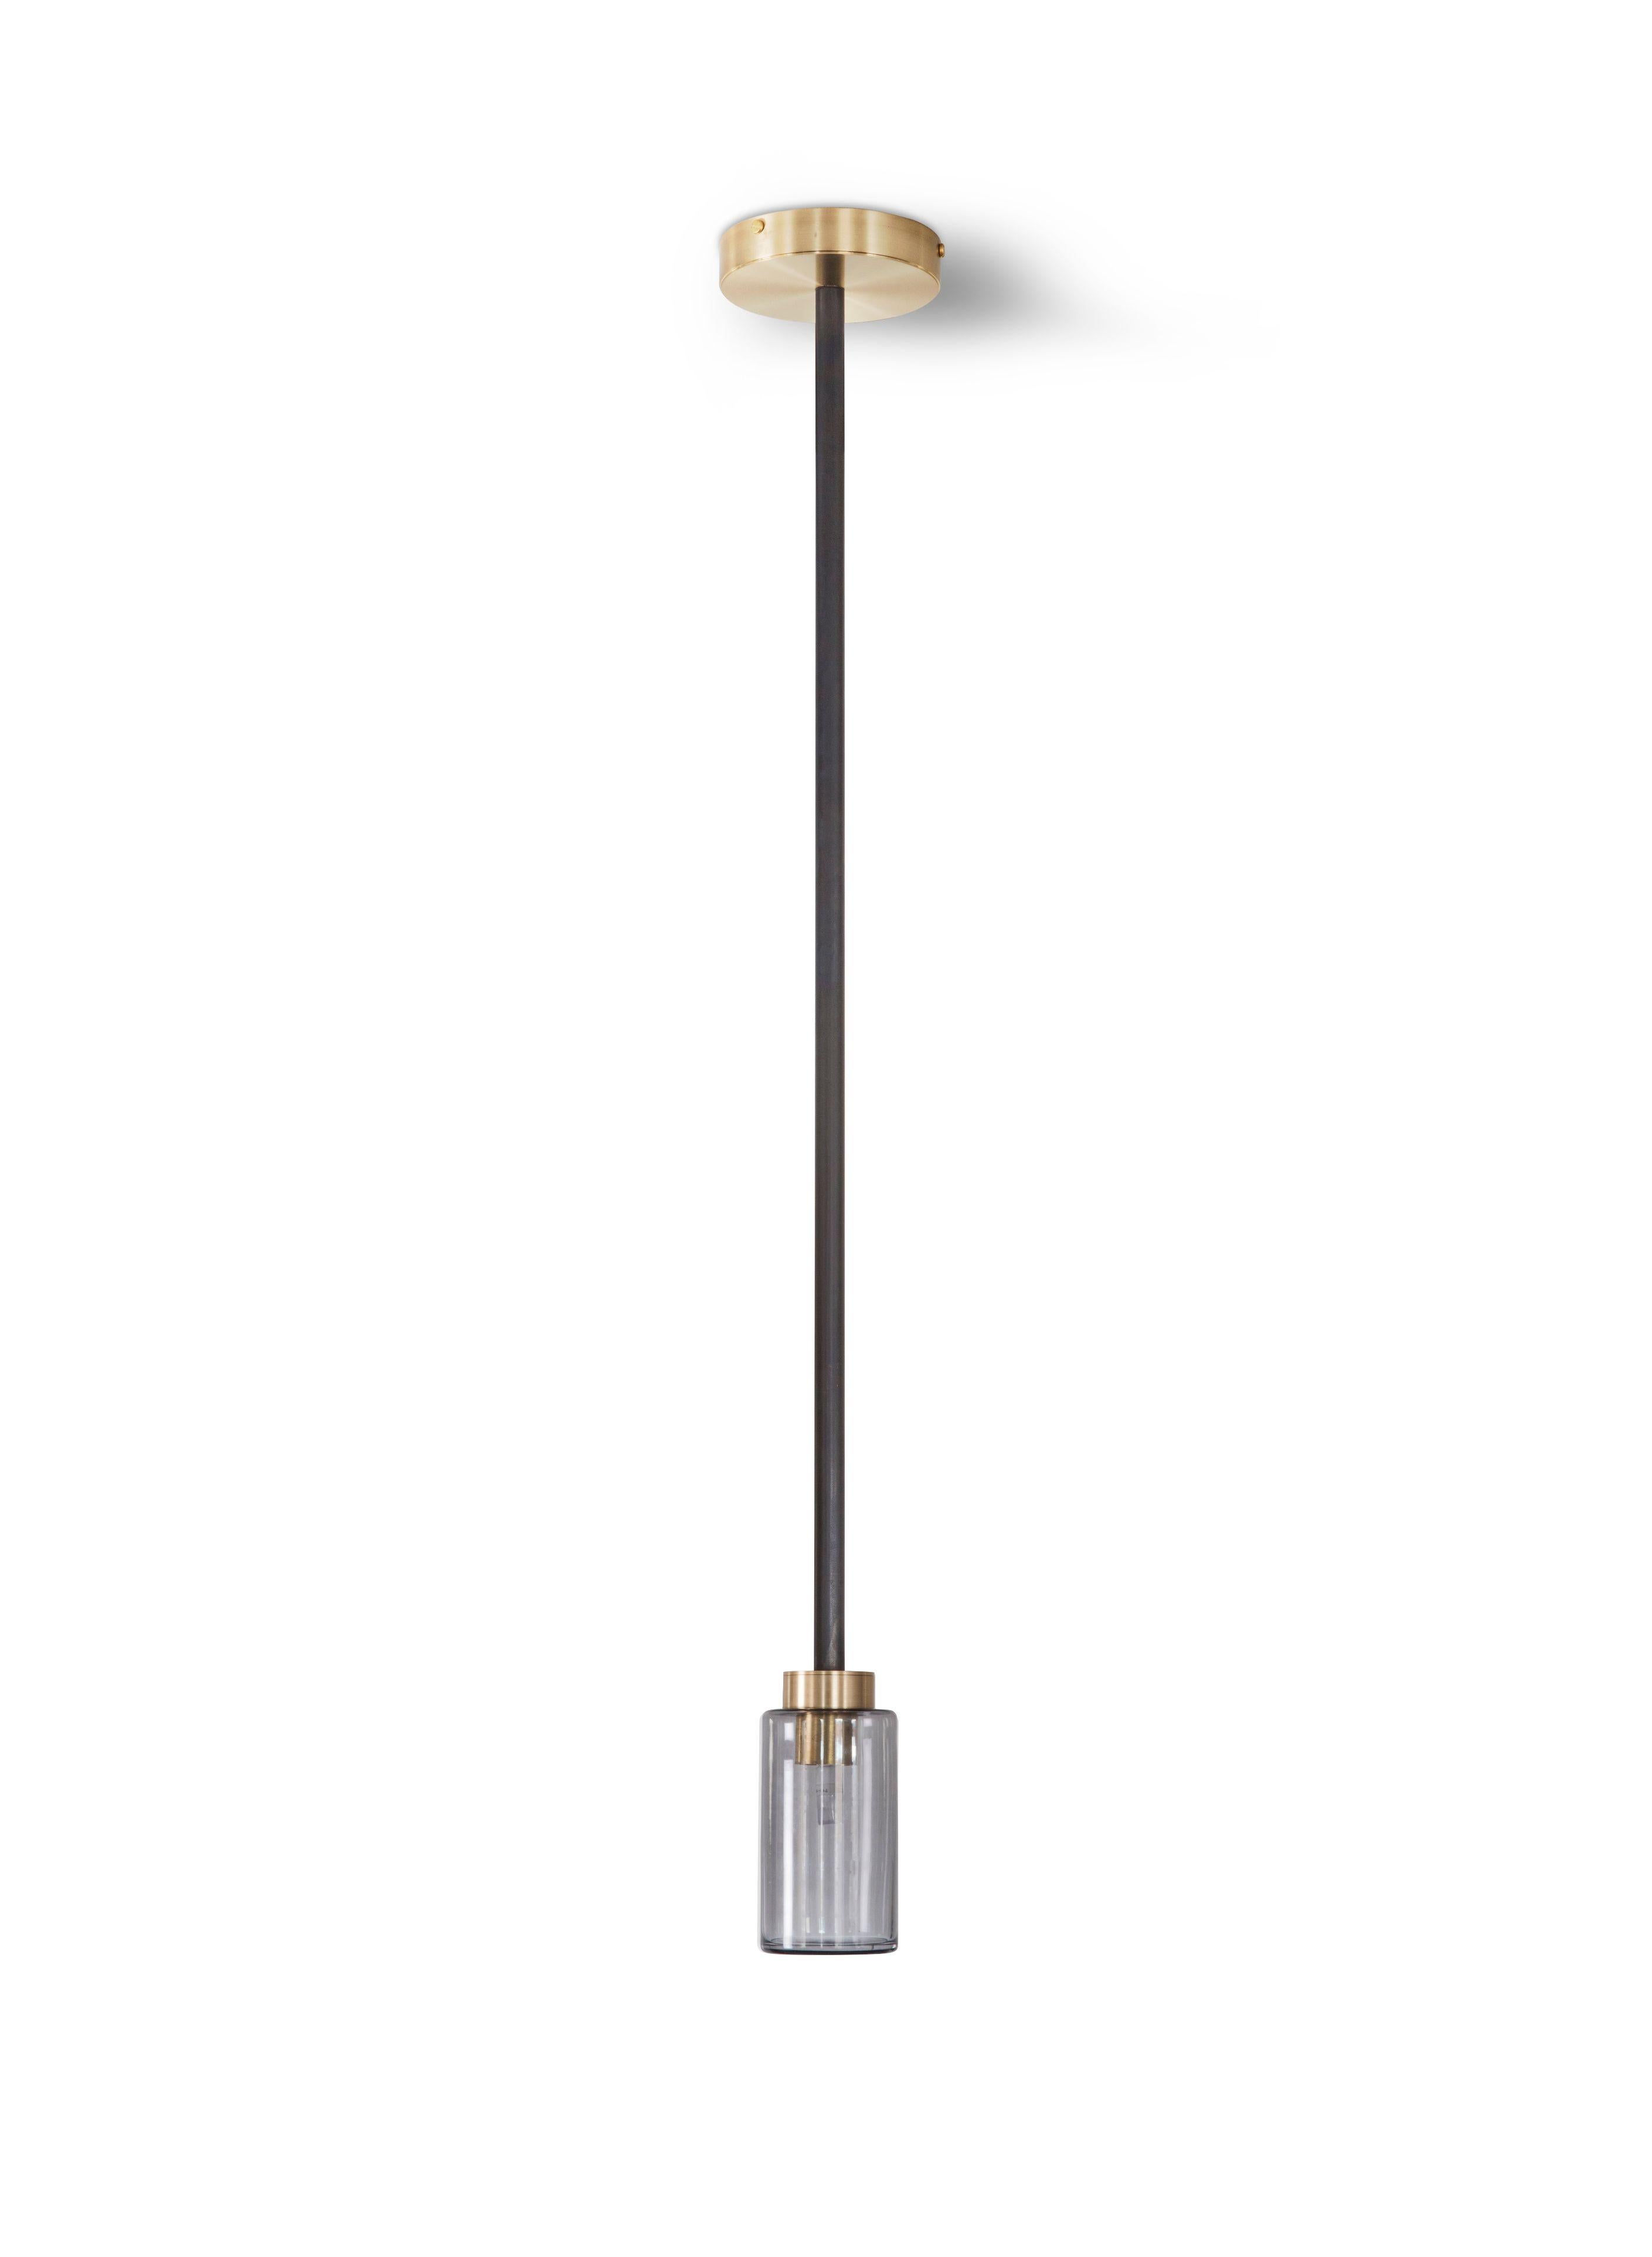 Smoked Farol pendant by Bert Frank
Dimensions: H 14 x D 7 cm
Materials: Brass, bronze 

Available finishes: Bronzed brass, black brass
All our lamps can be wired according to each country. If sold to the USA it will be wired for the USA for